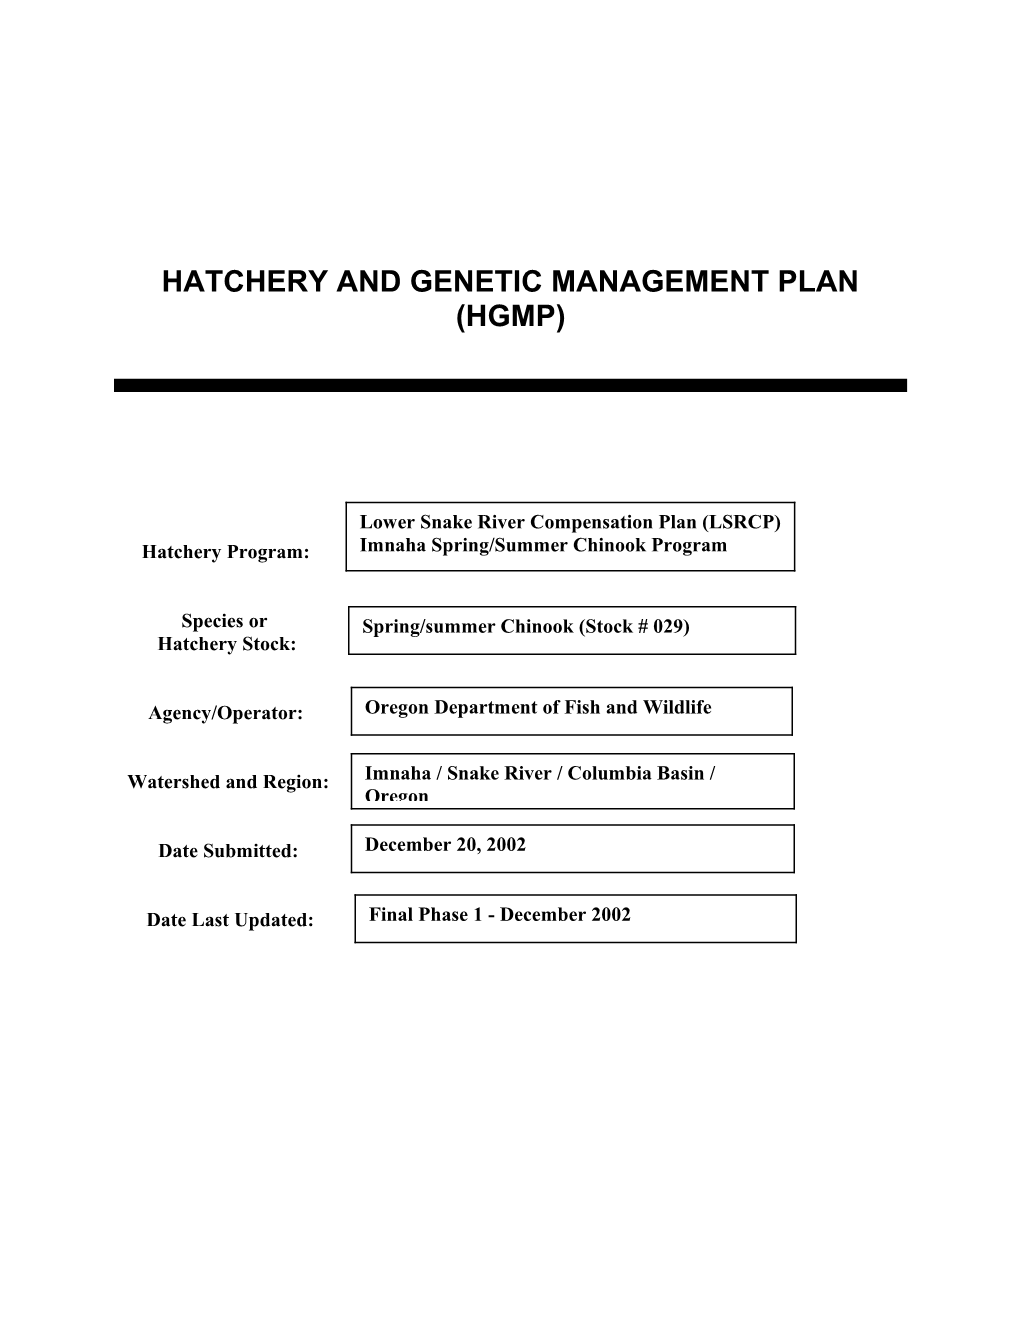 Hatchery and Genetic Management Plan s1